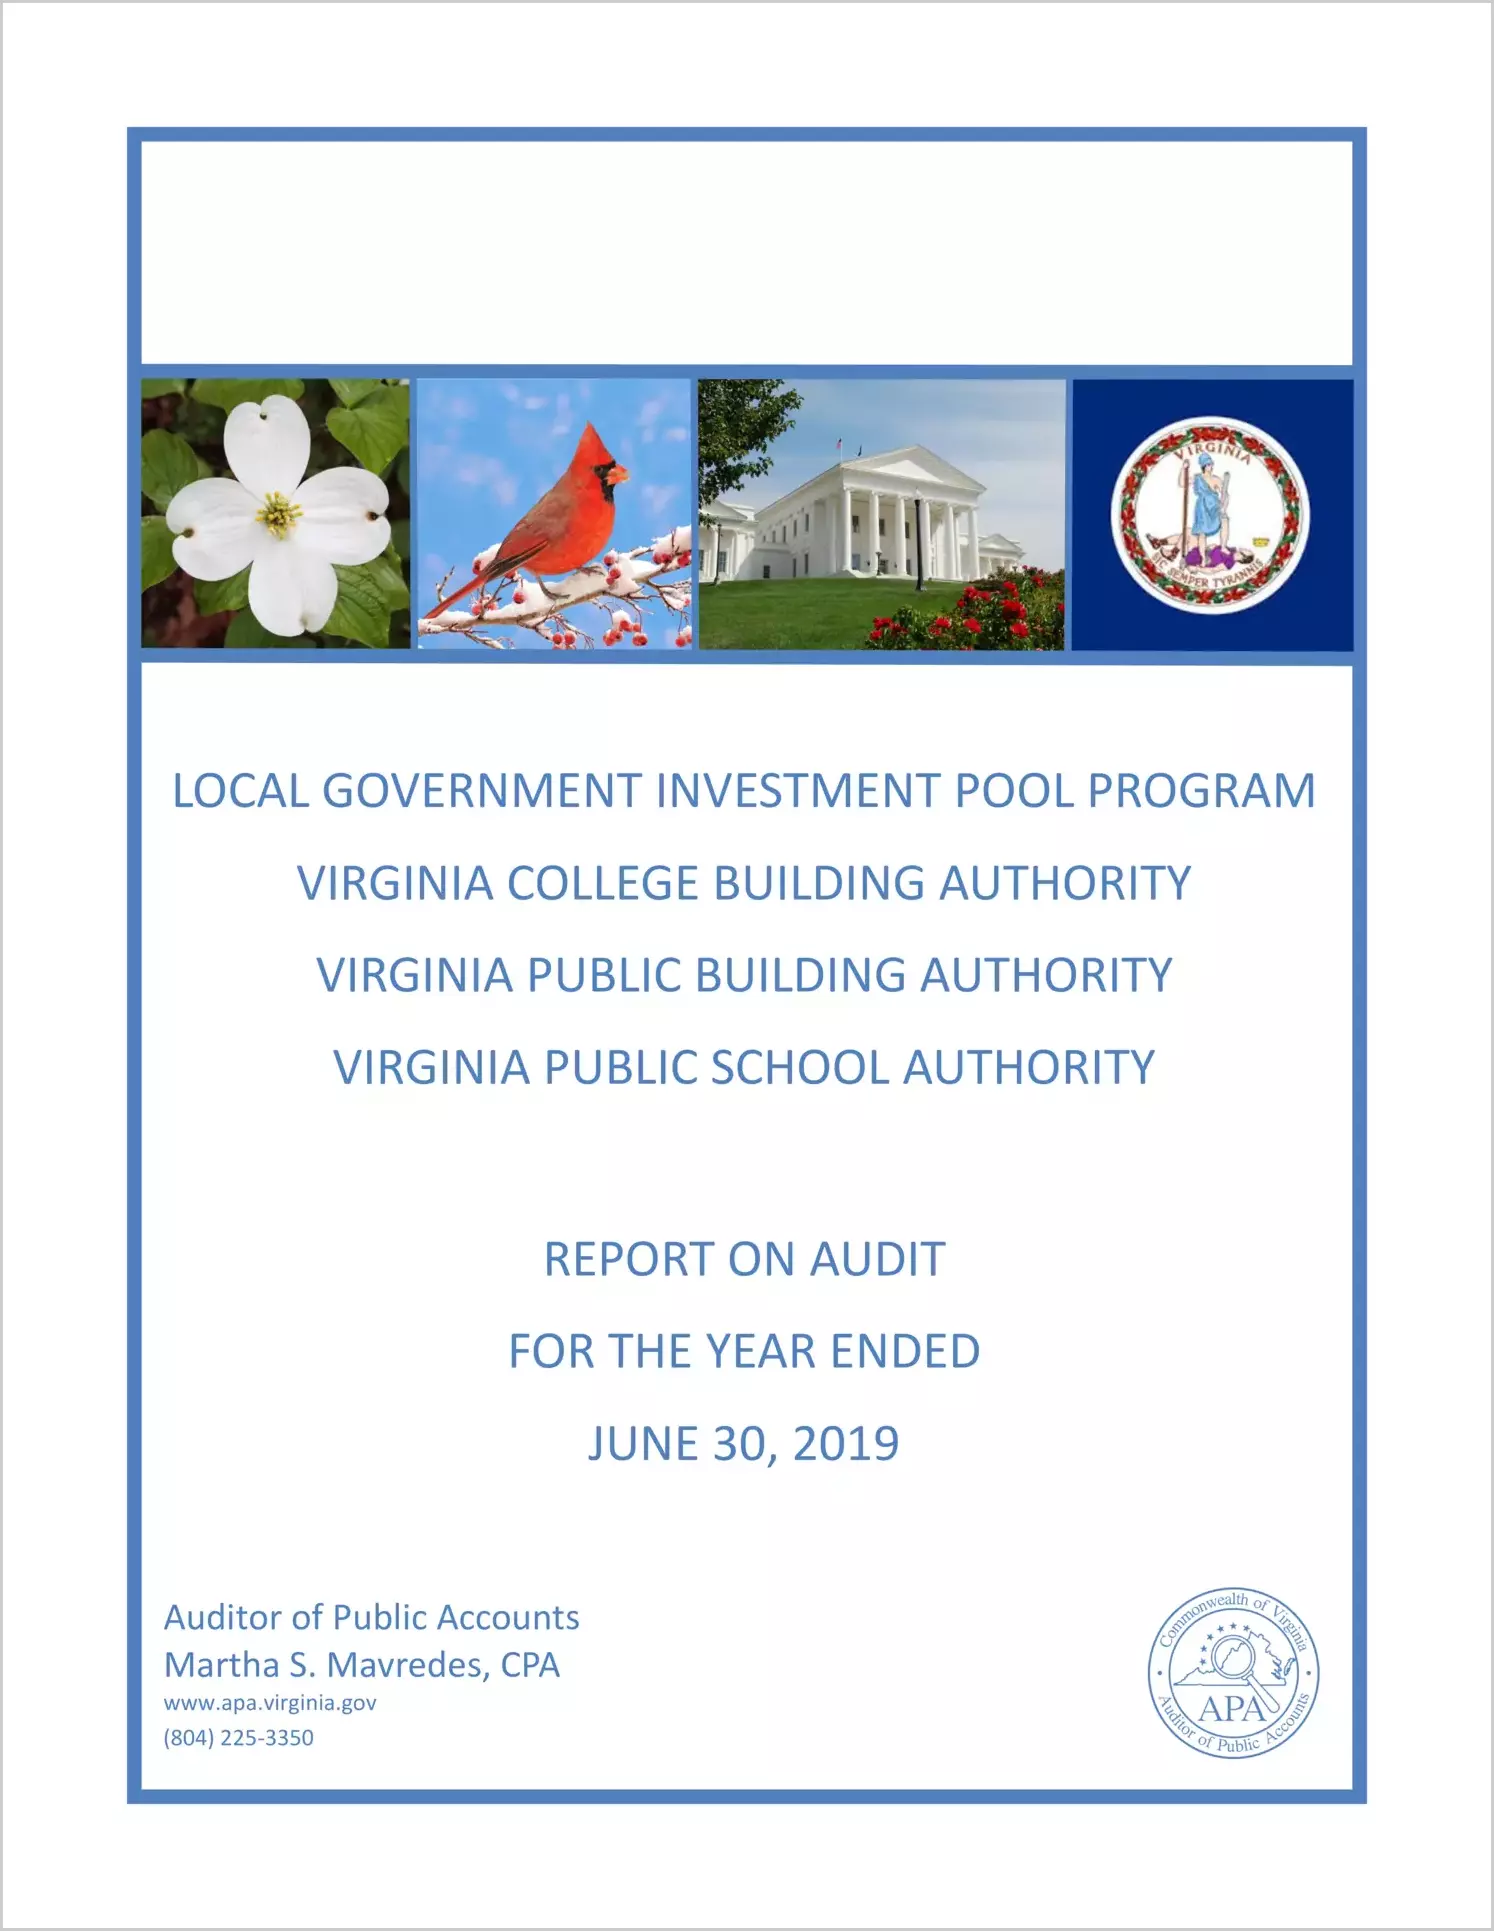 Local Government Investment Pool Program, Virginia College Building Authority, Virginia Public Building Authority, Virginia Public School Authority for the year ended June 30, 2019